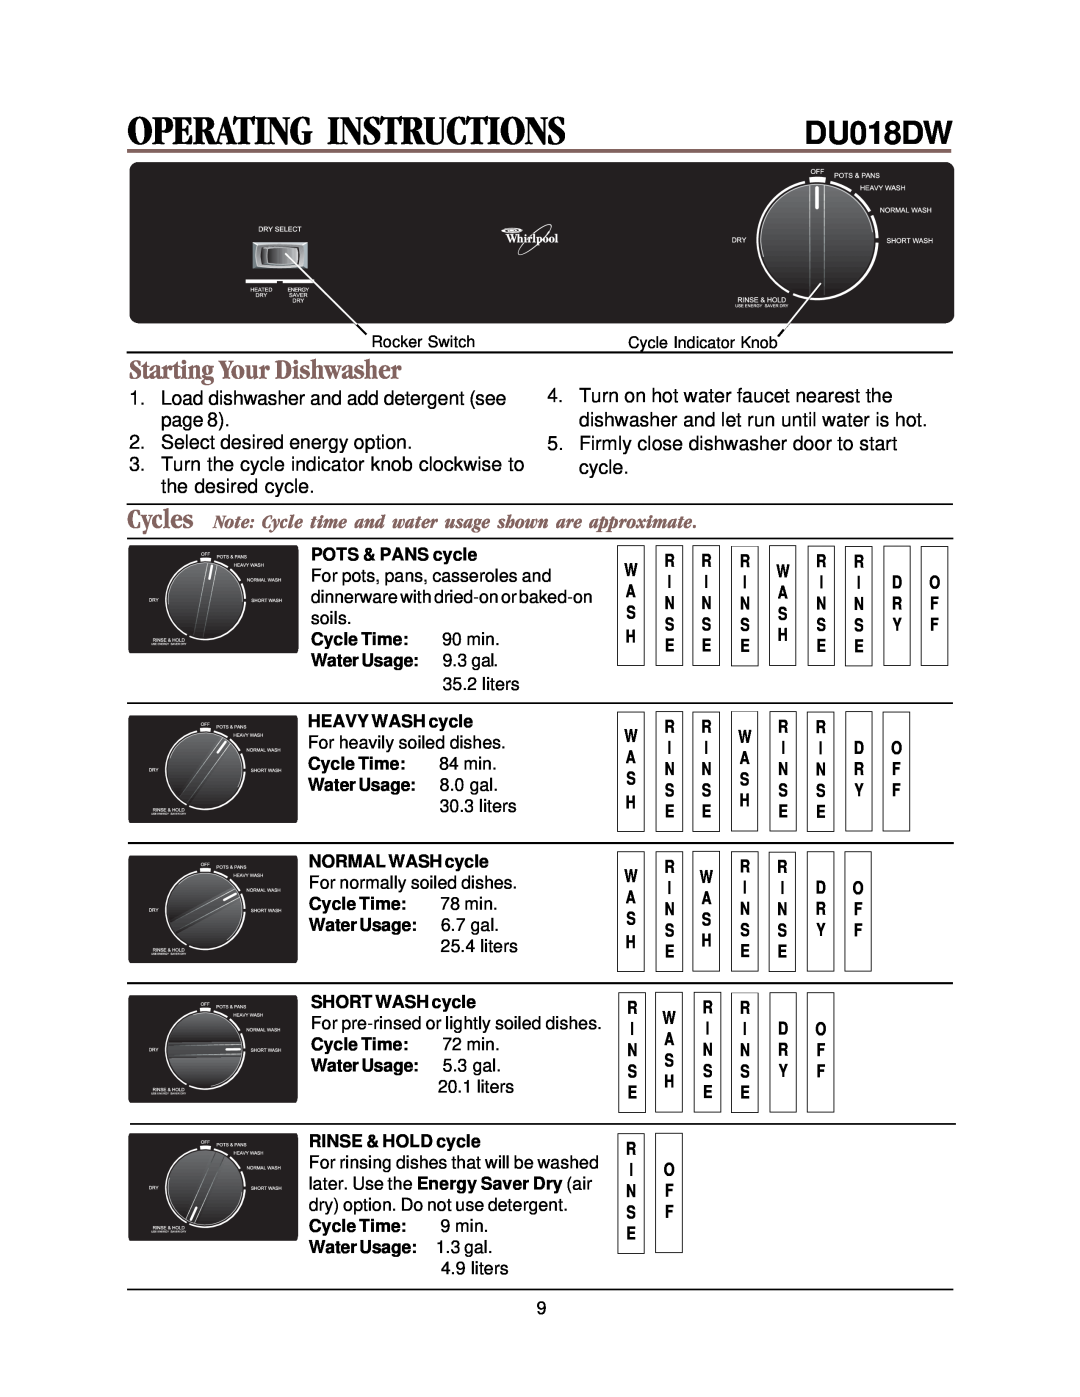 Whirlpool DU018DW manual Operating Instructions, Cycles Note Cycle time and water usage shown are approximate 